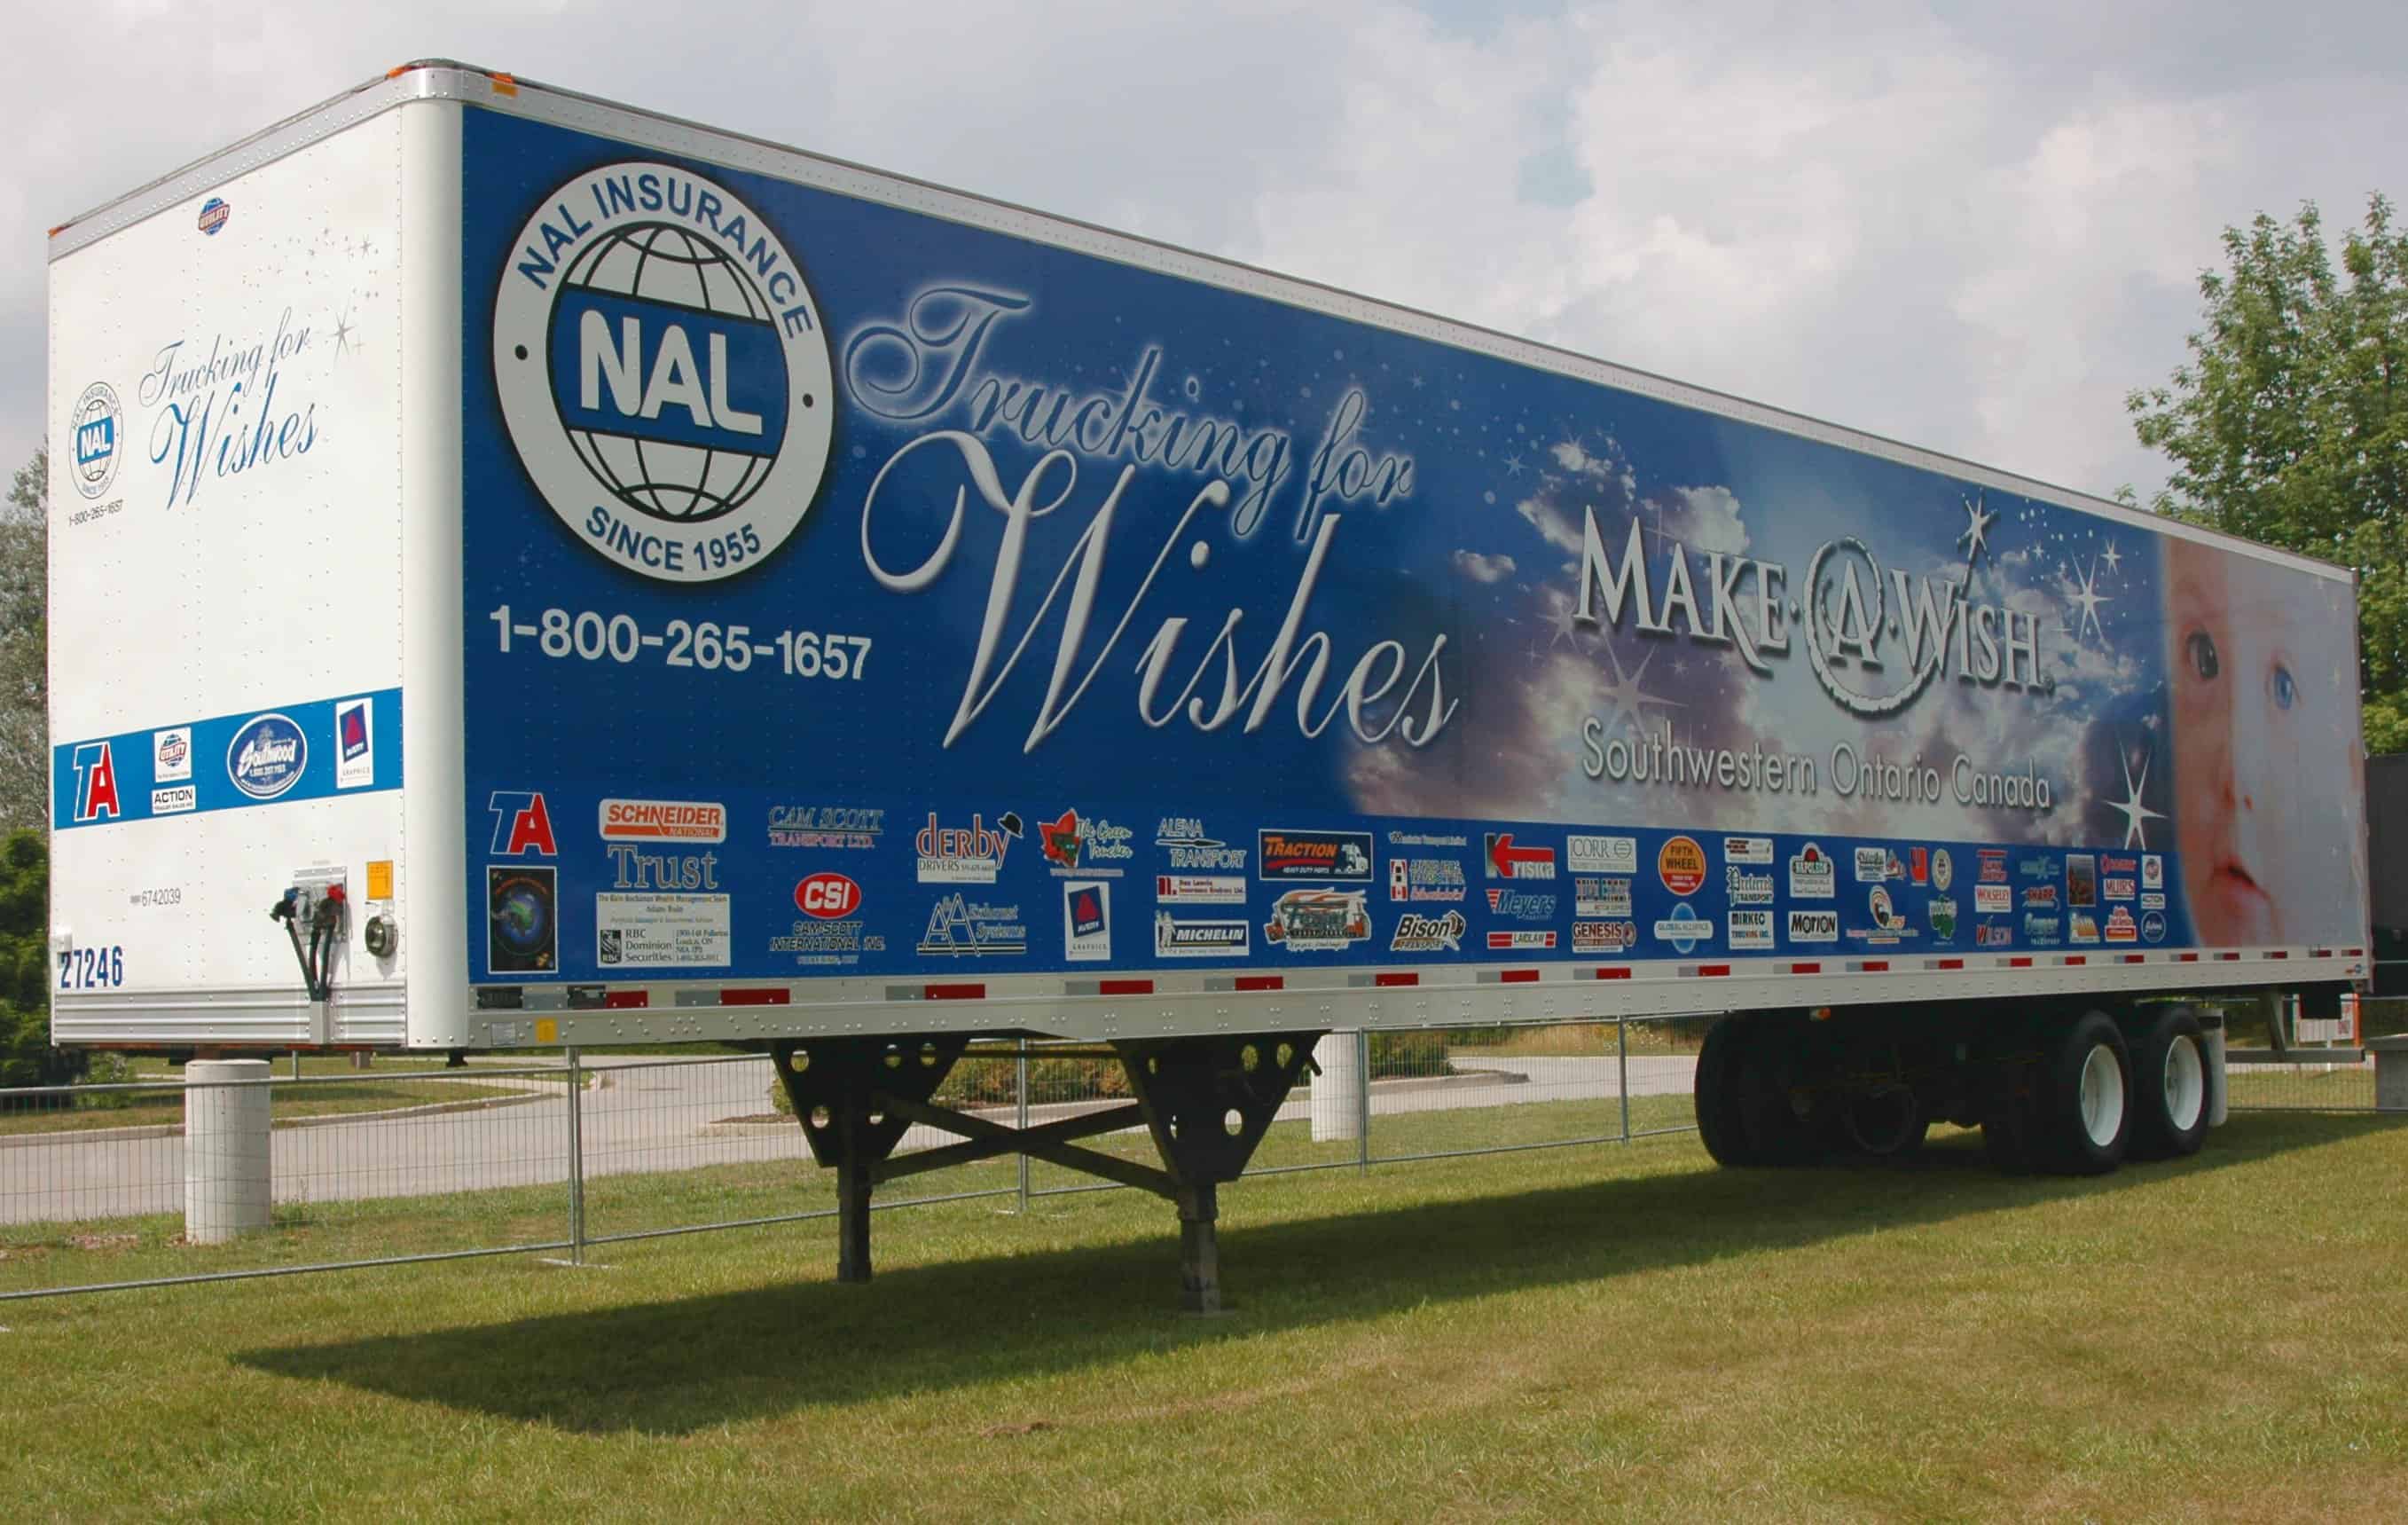 Trucking for Wishes Trailer